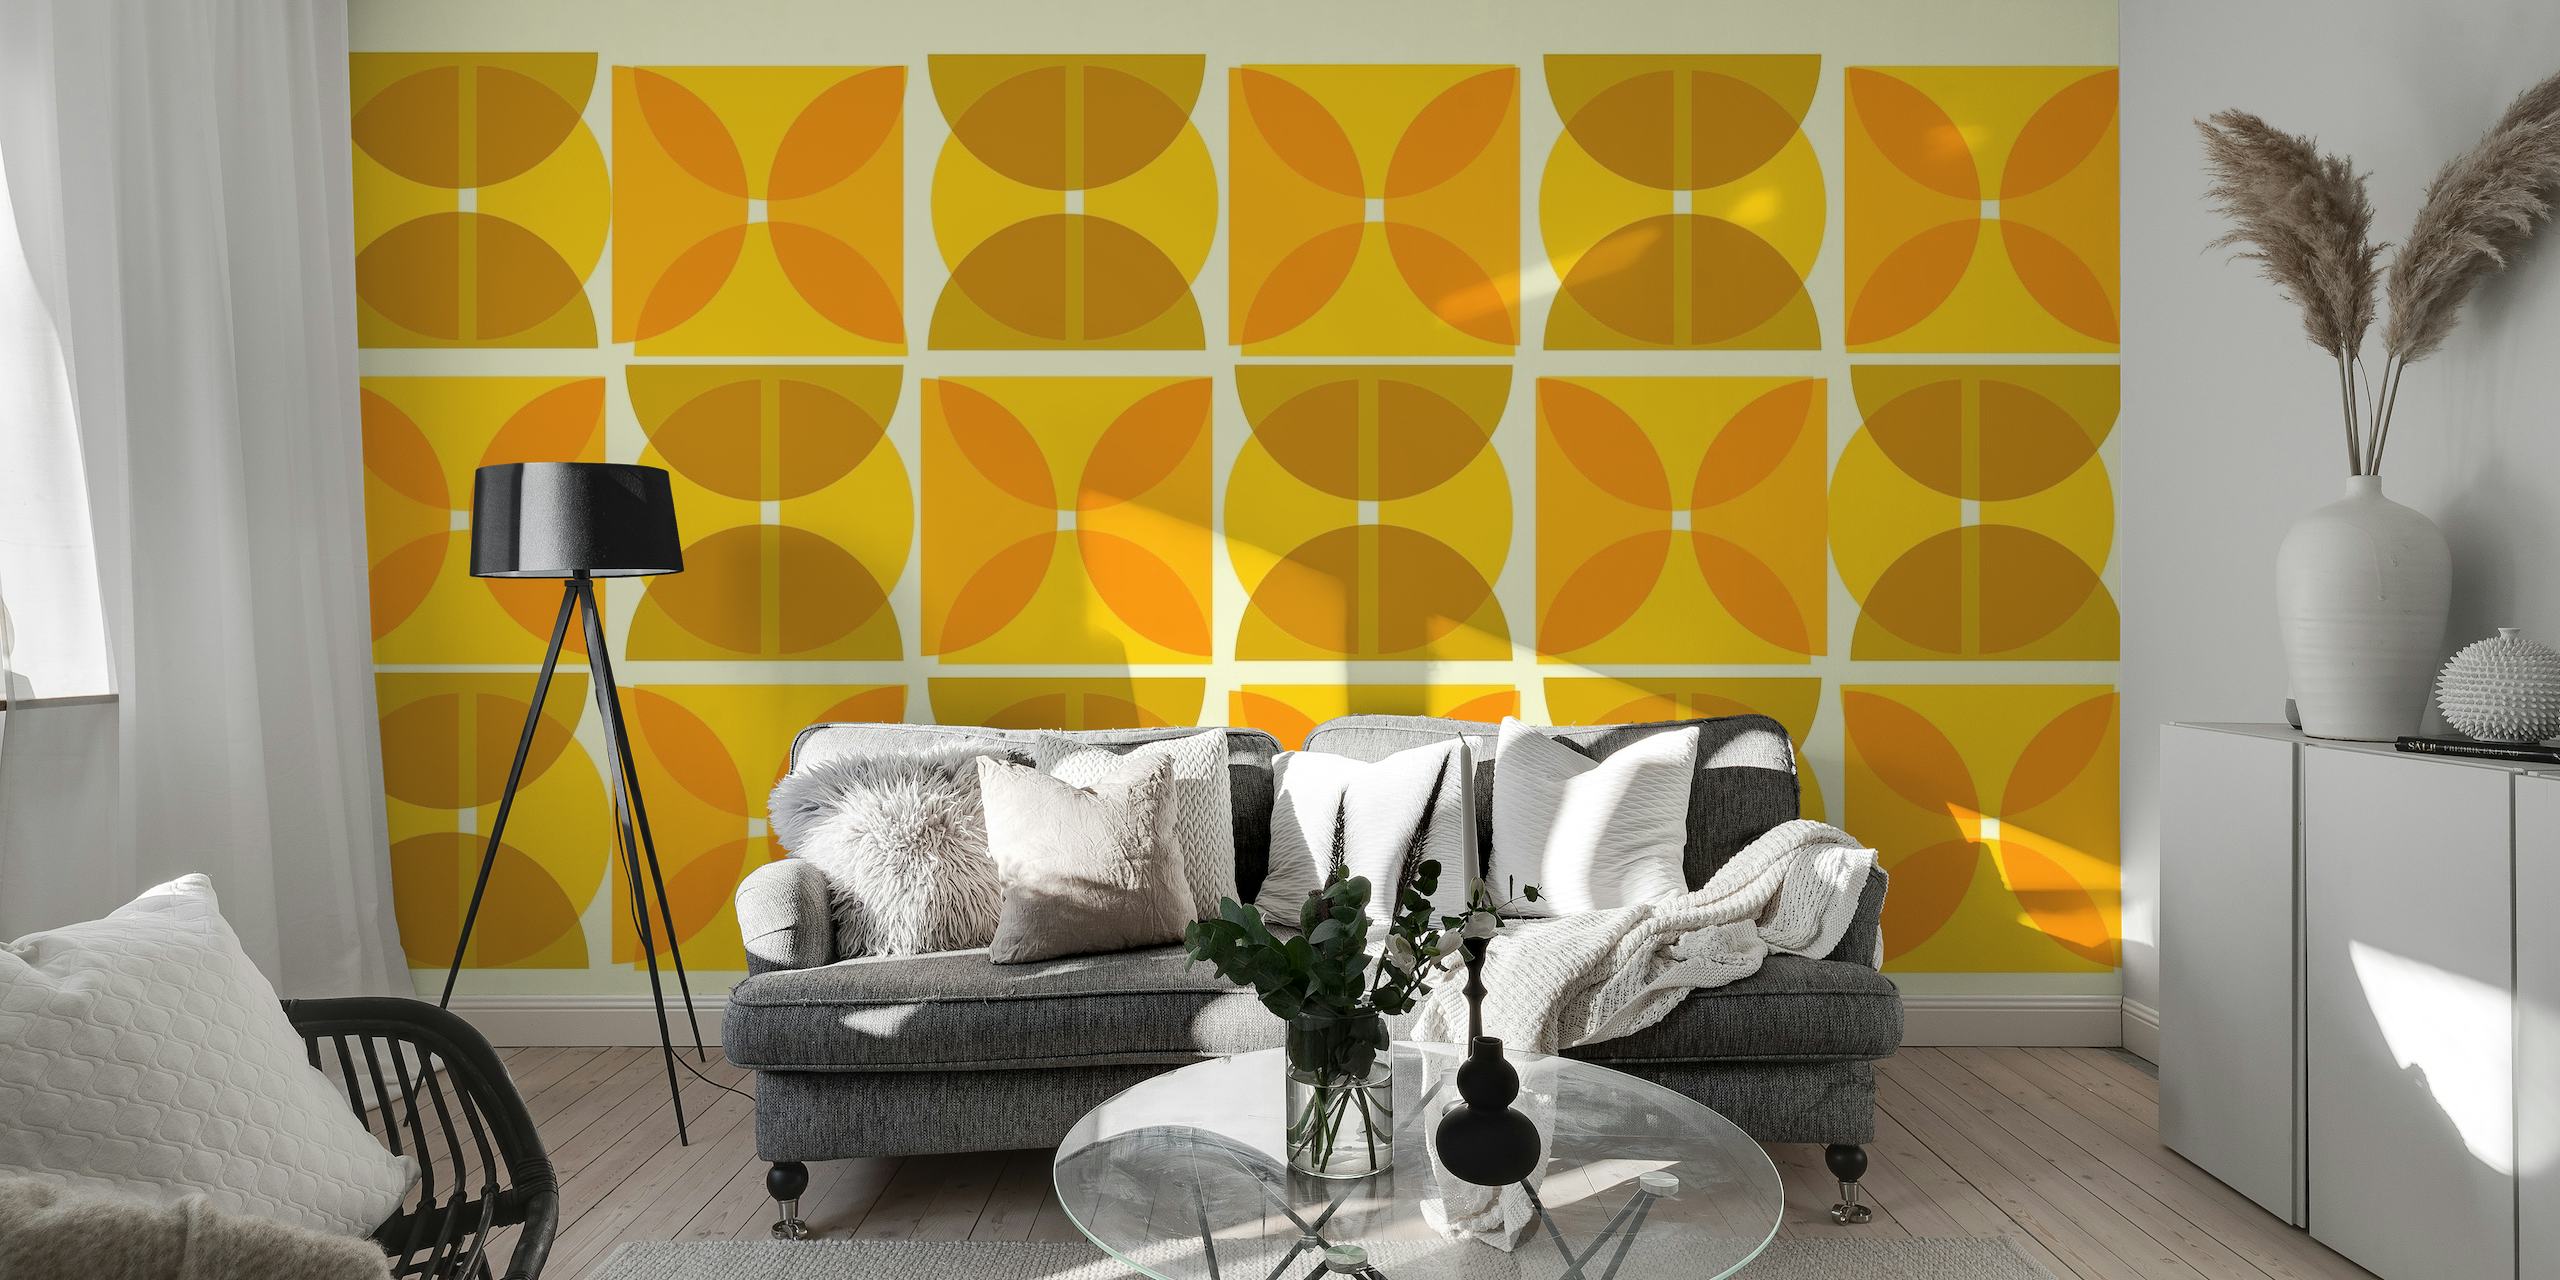 Bauhaus-inspired wall mural with abstract geometric shapes in yellow and brown tones